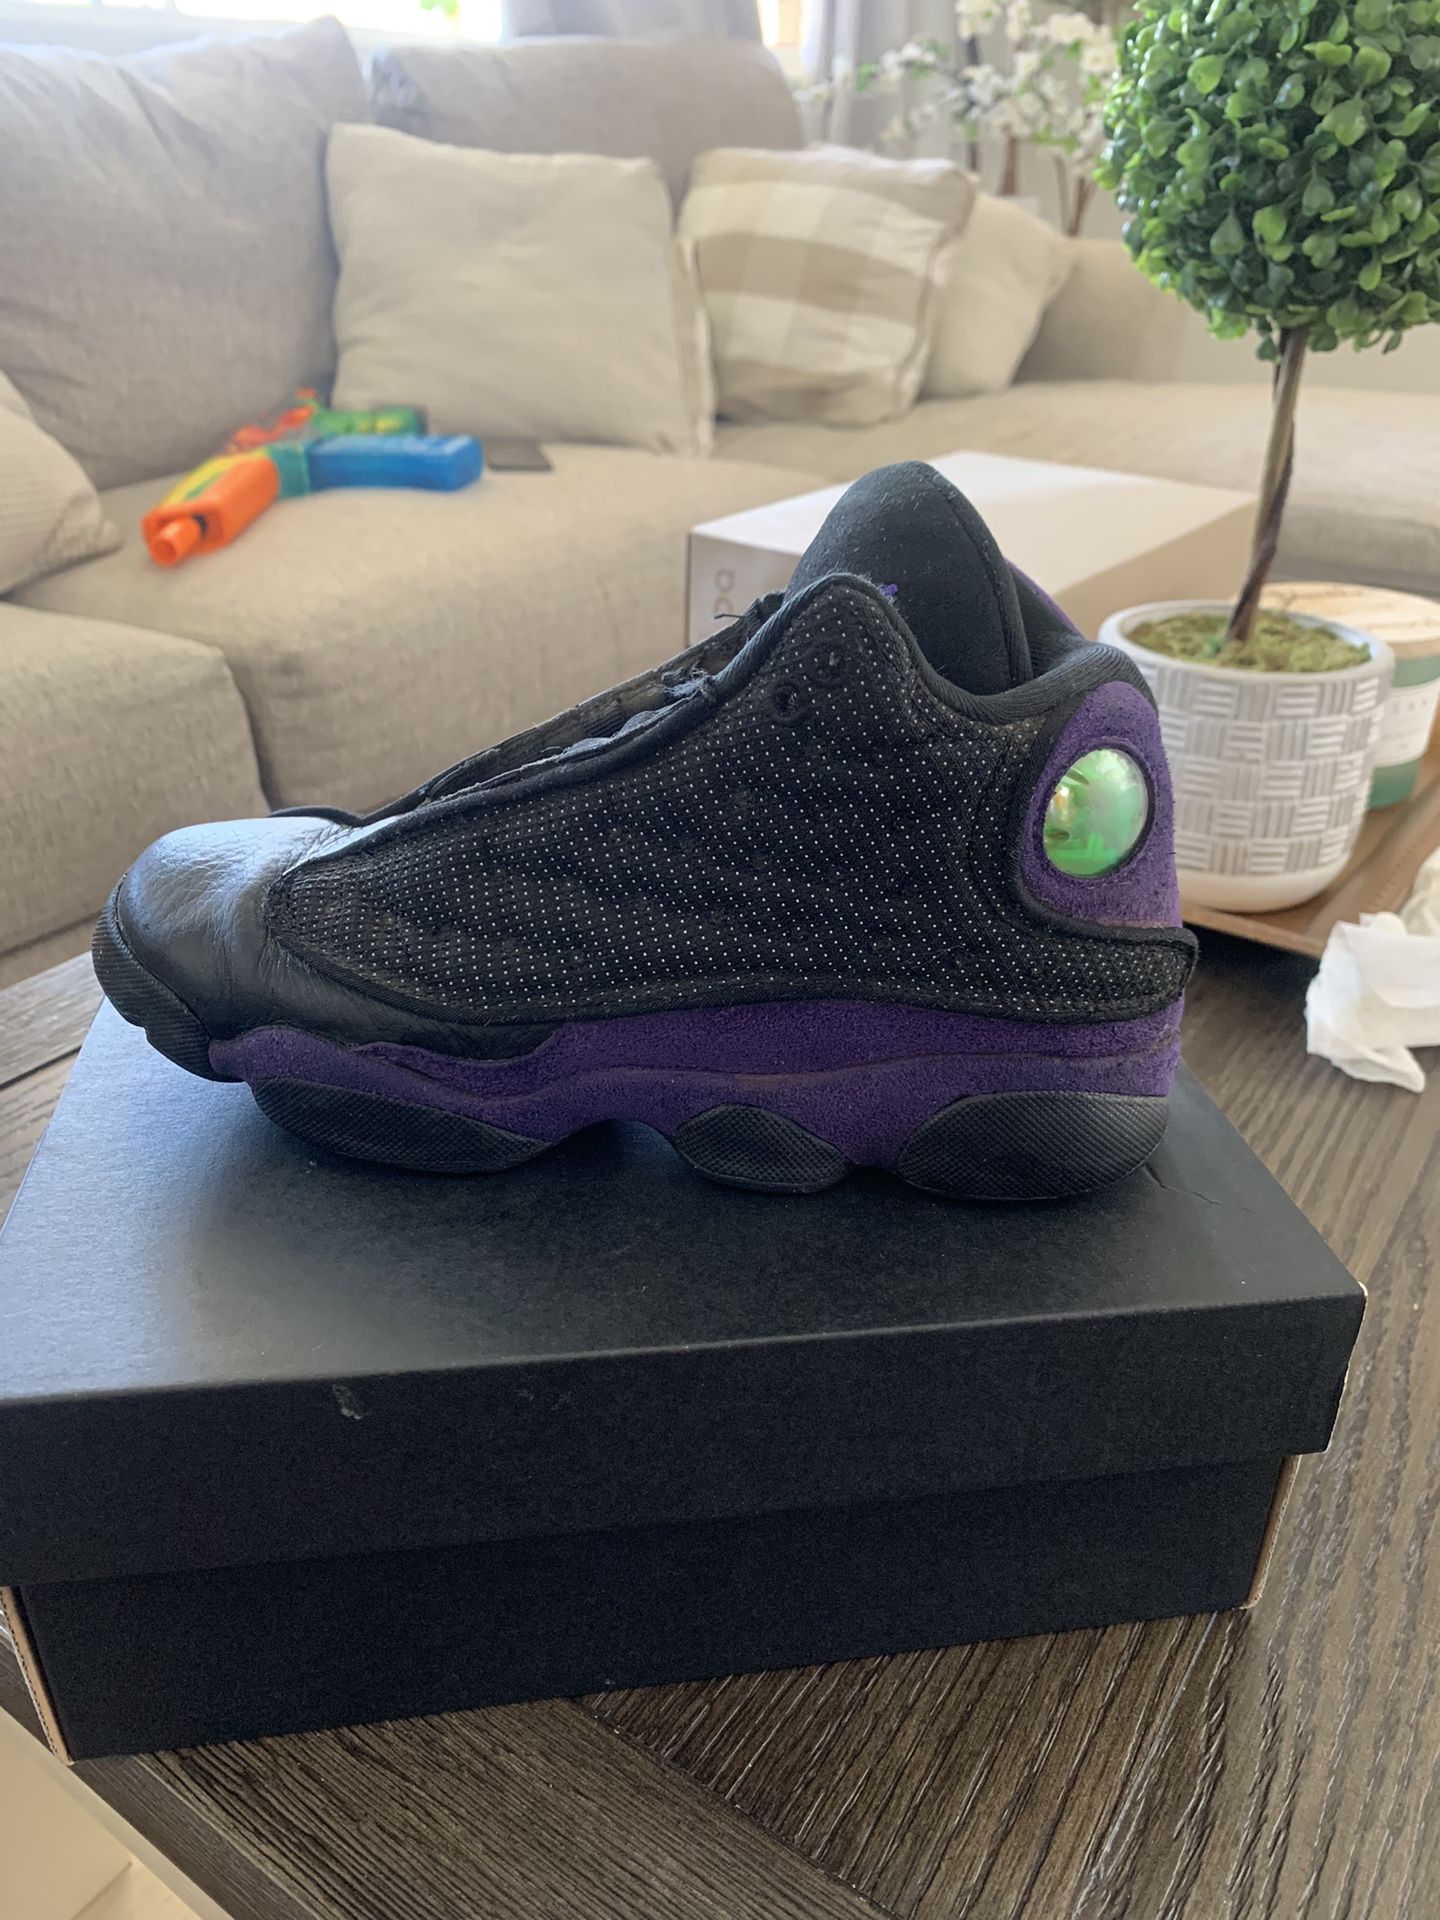 Youth Jordan 13 Limited Edition Purple Court